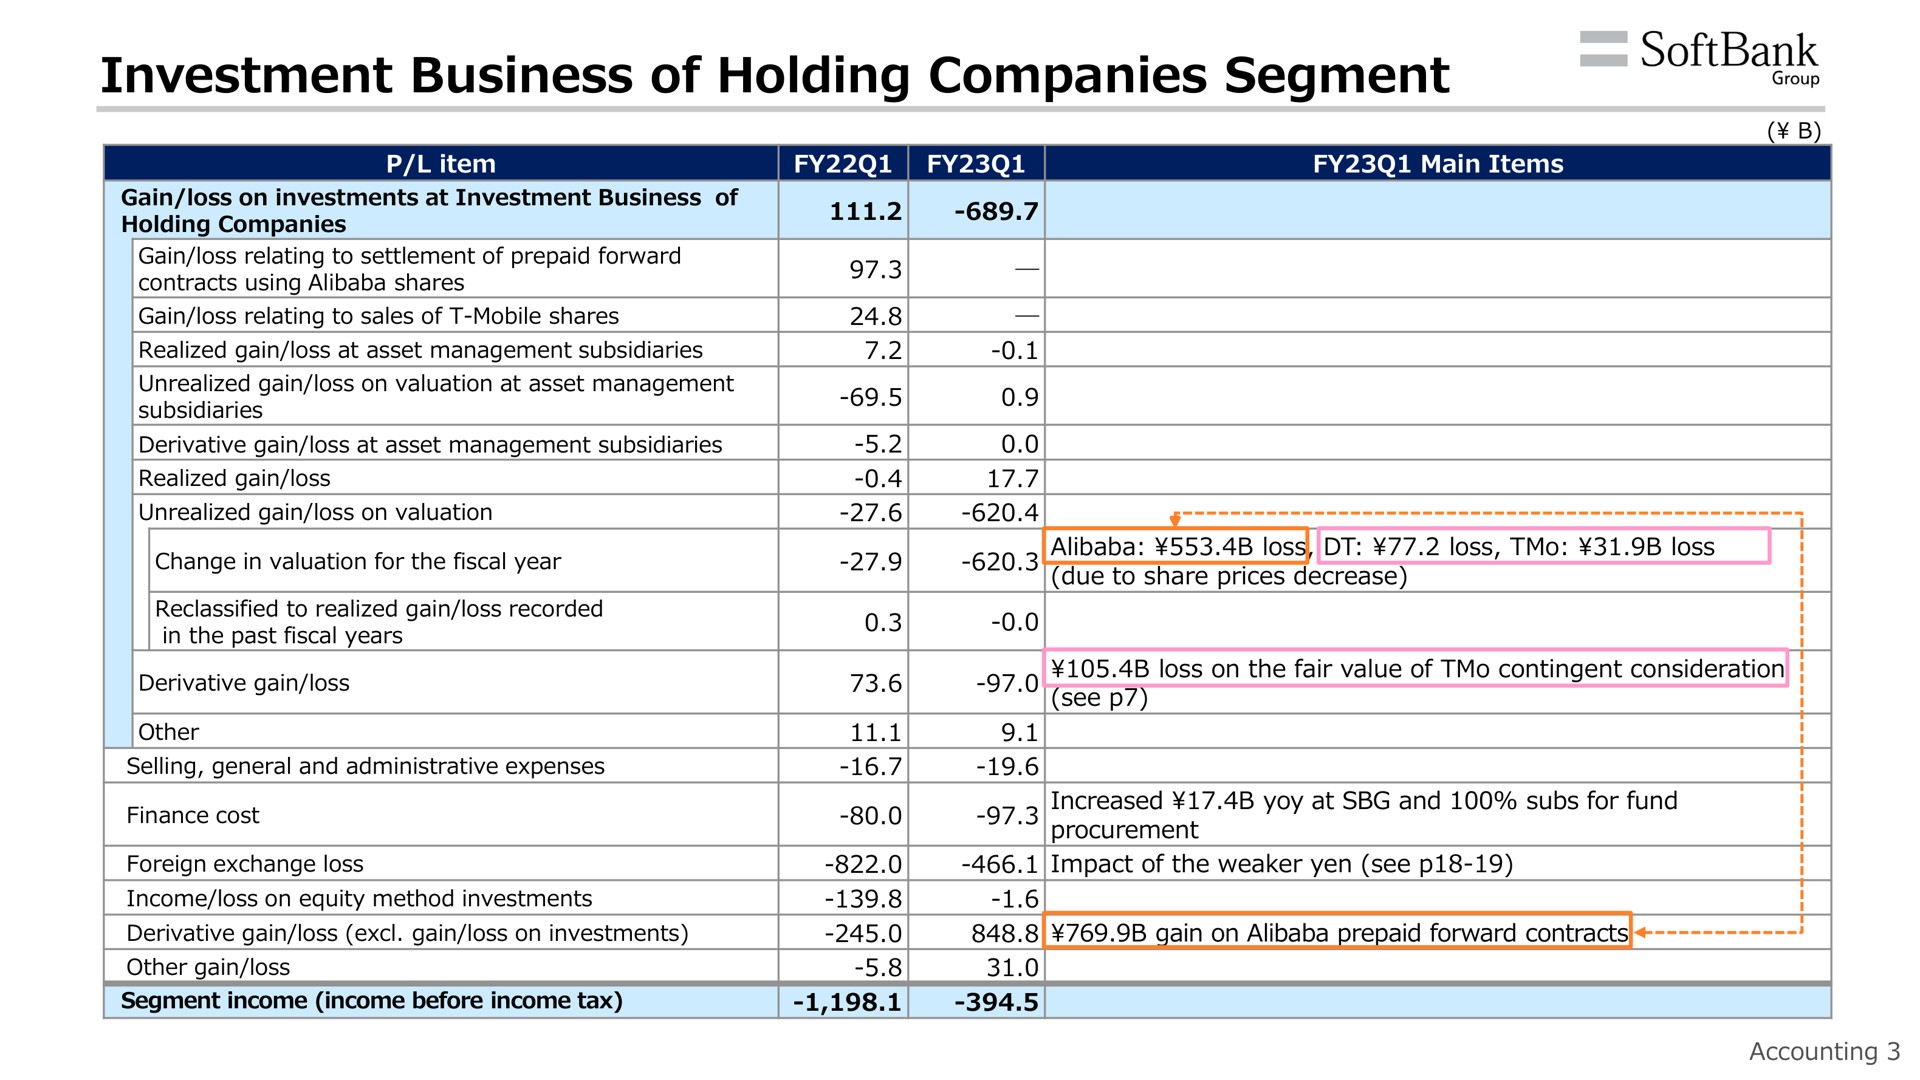 investment business of holding companies segment group | SoftBank